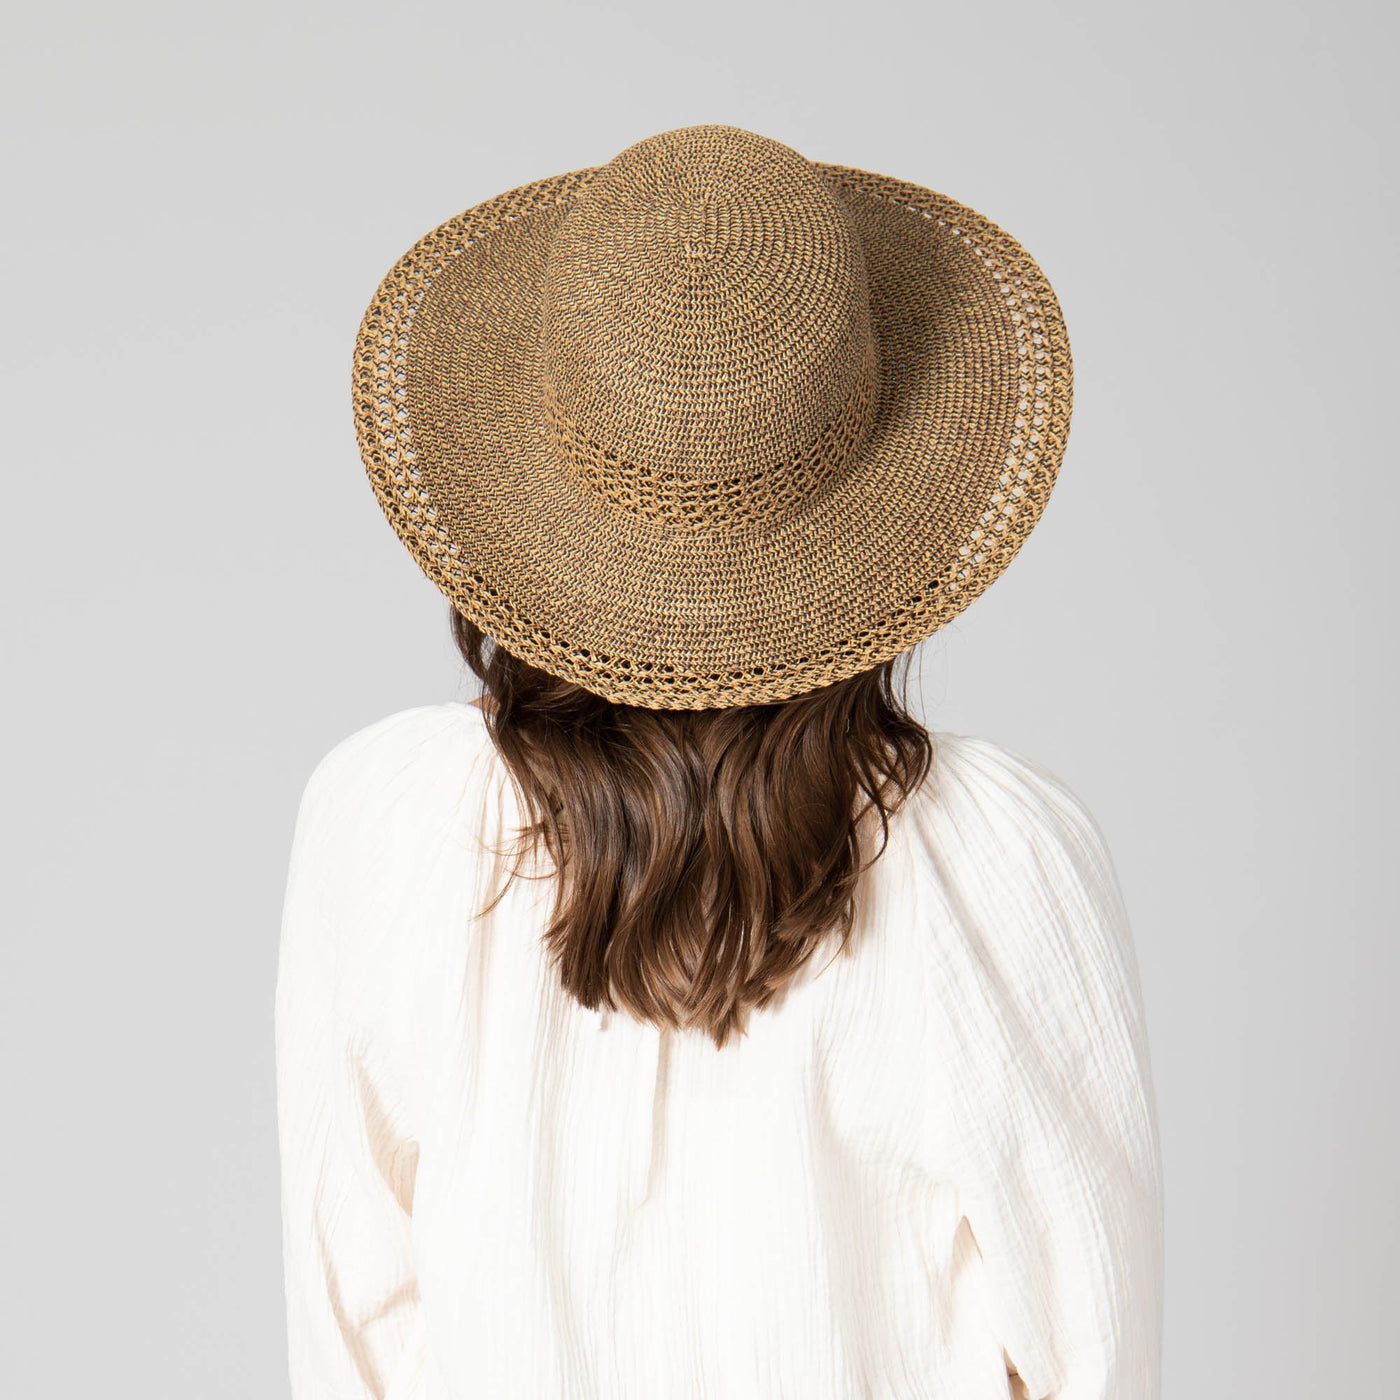 Everyday Sun Hat - Women's Sun Hat with Open Weave Stripes